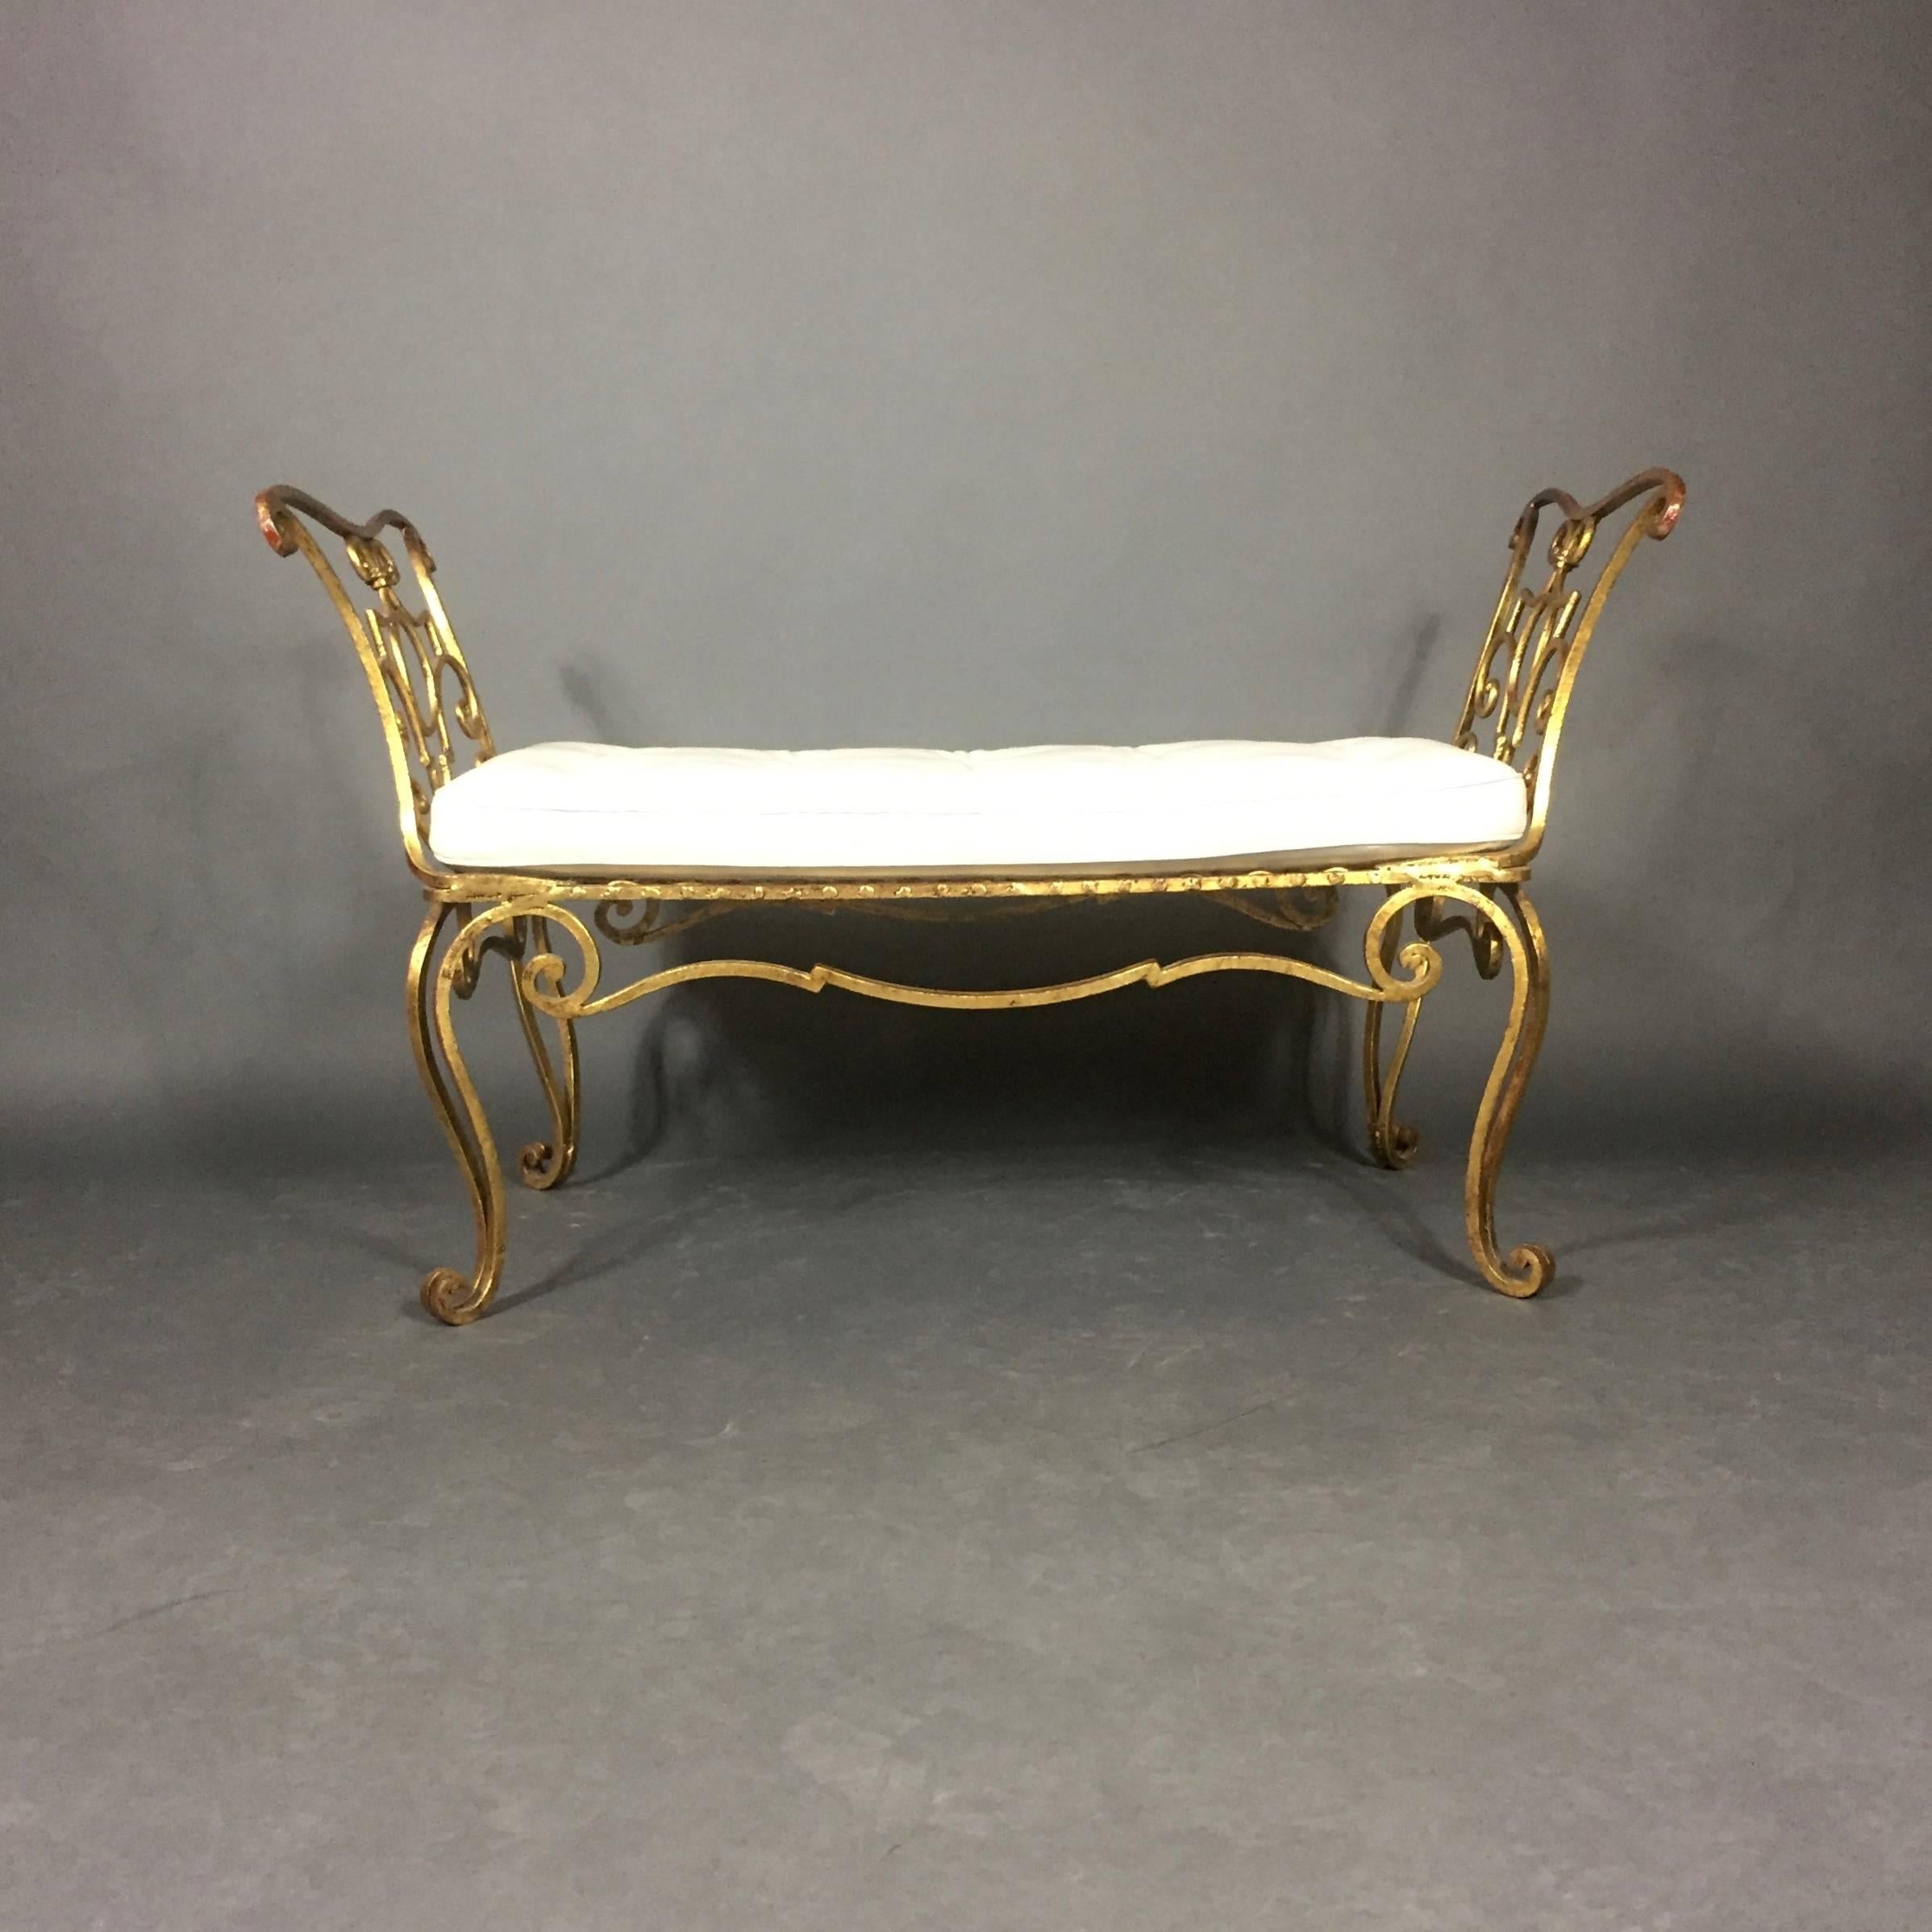 Exceptional detail in this Classic bench by Jean-Charles Moreux with finely shaped and gilded wrought iron over red paint that add richness of color. New and luscious white buttoned leather seating beautifully shaped to match sculpted seat frame,